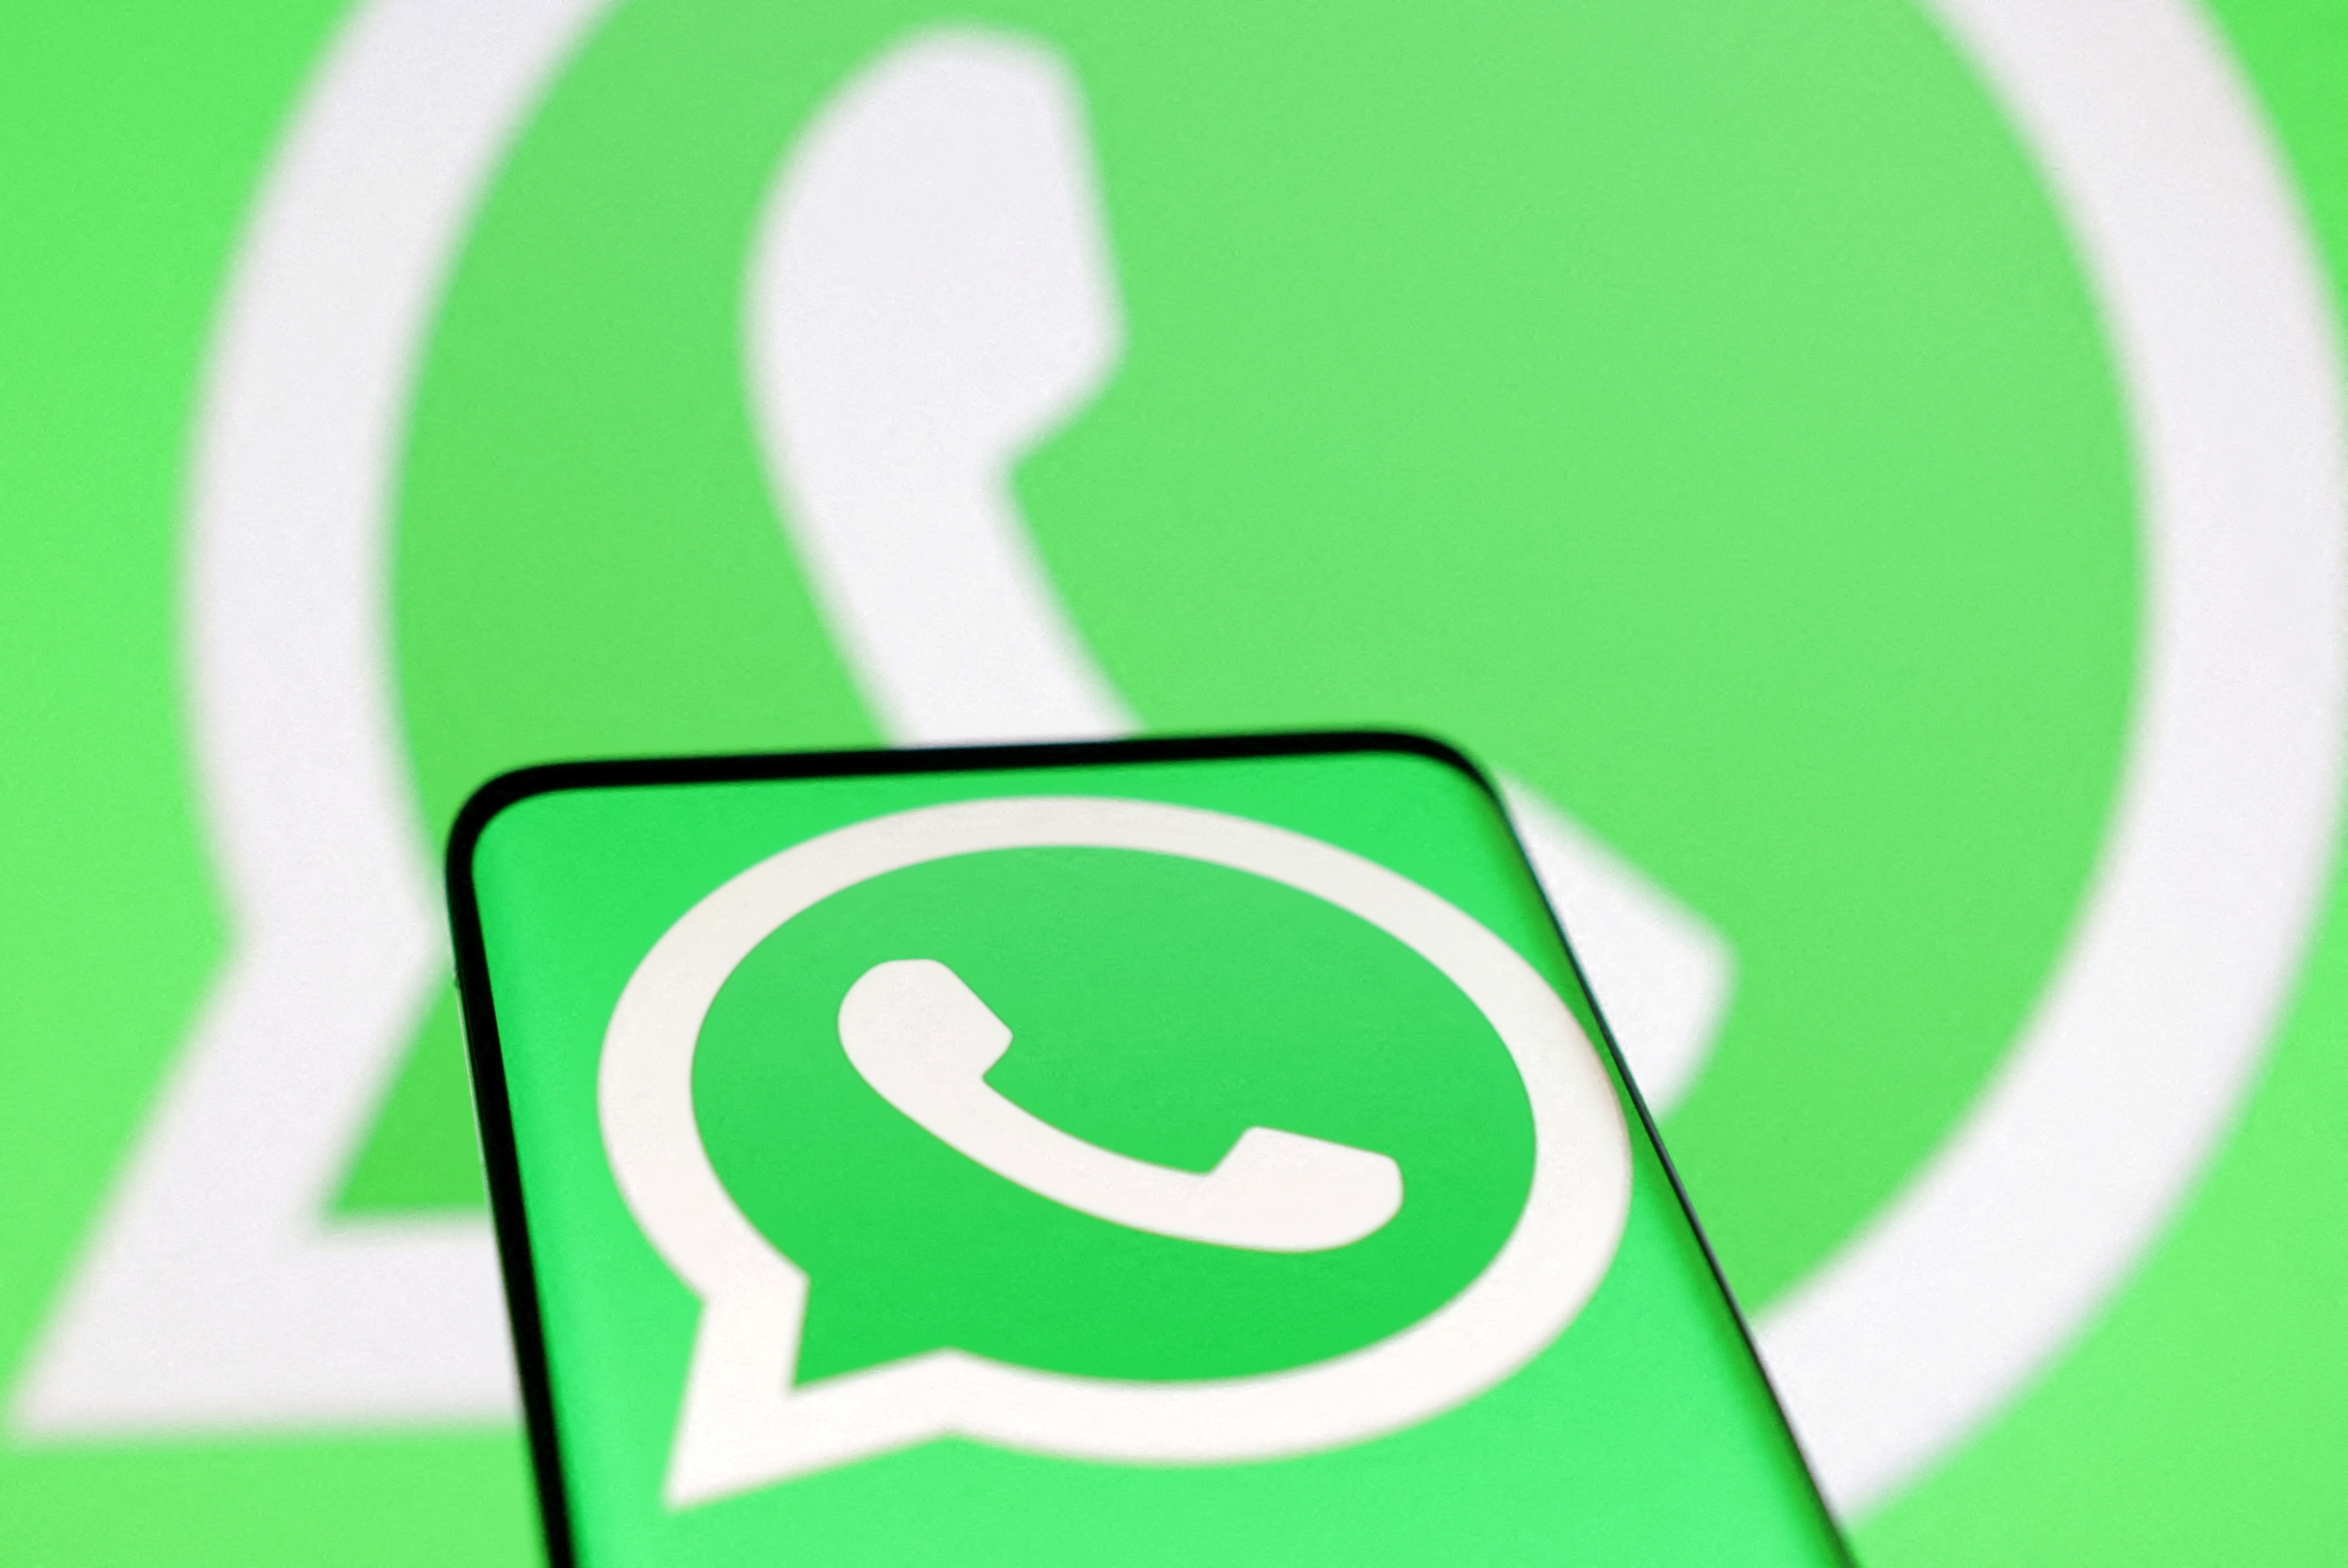 WhatsApp Launches Mac App With Video Calling for 8 People - CNET